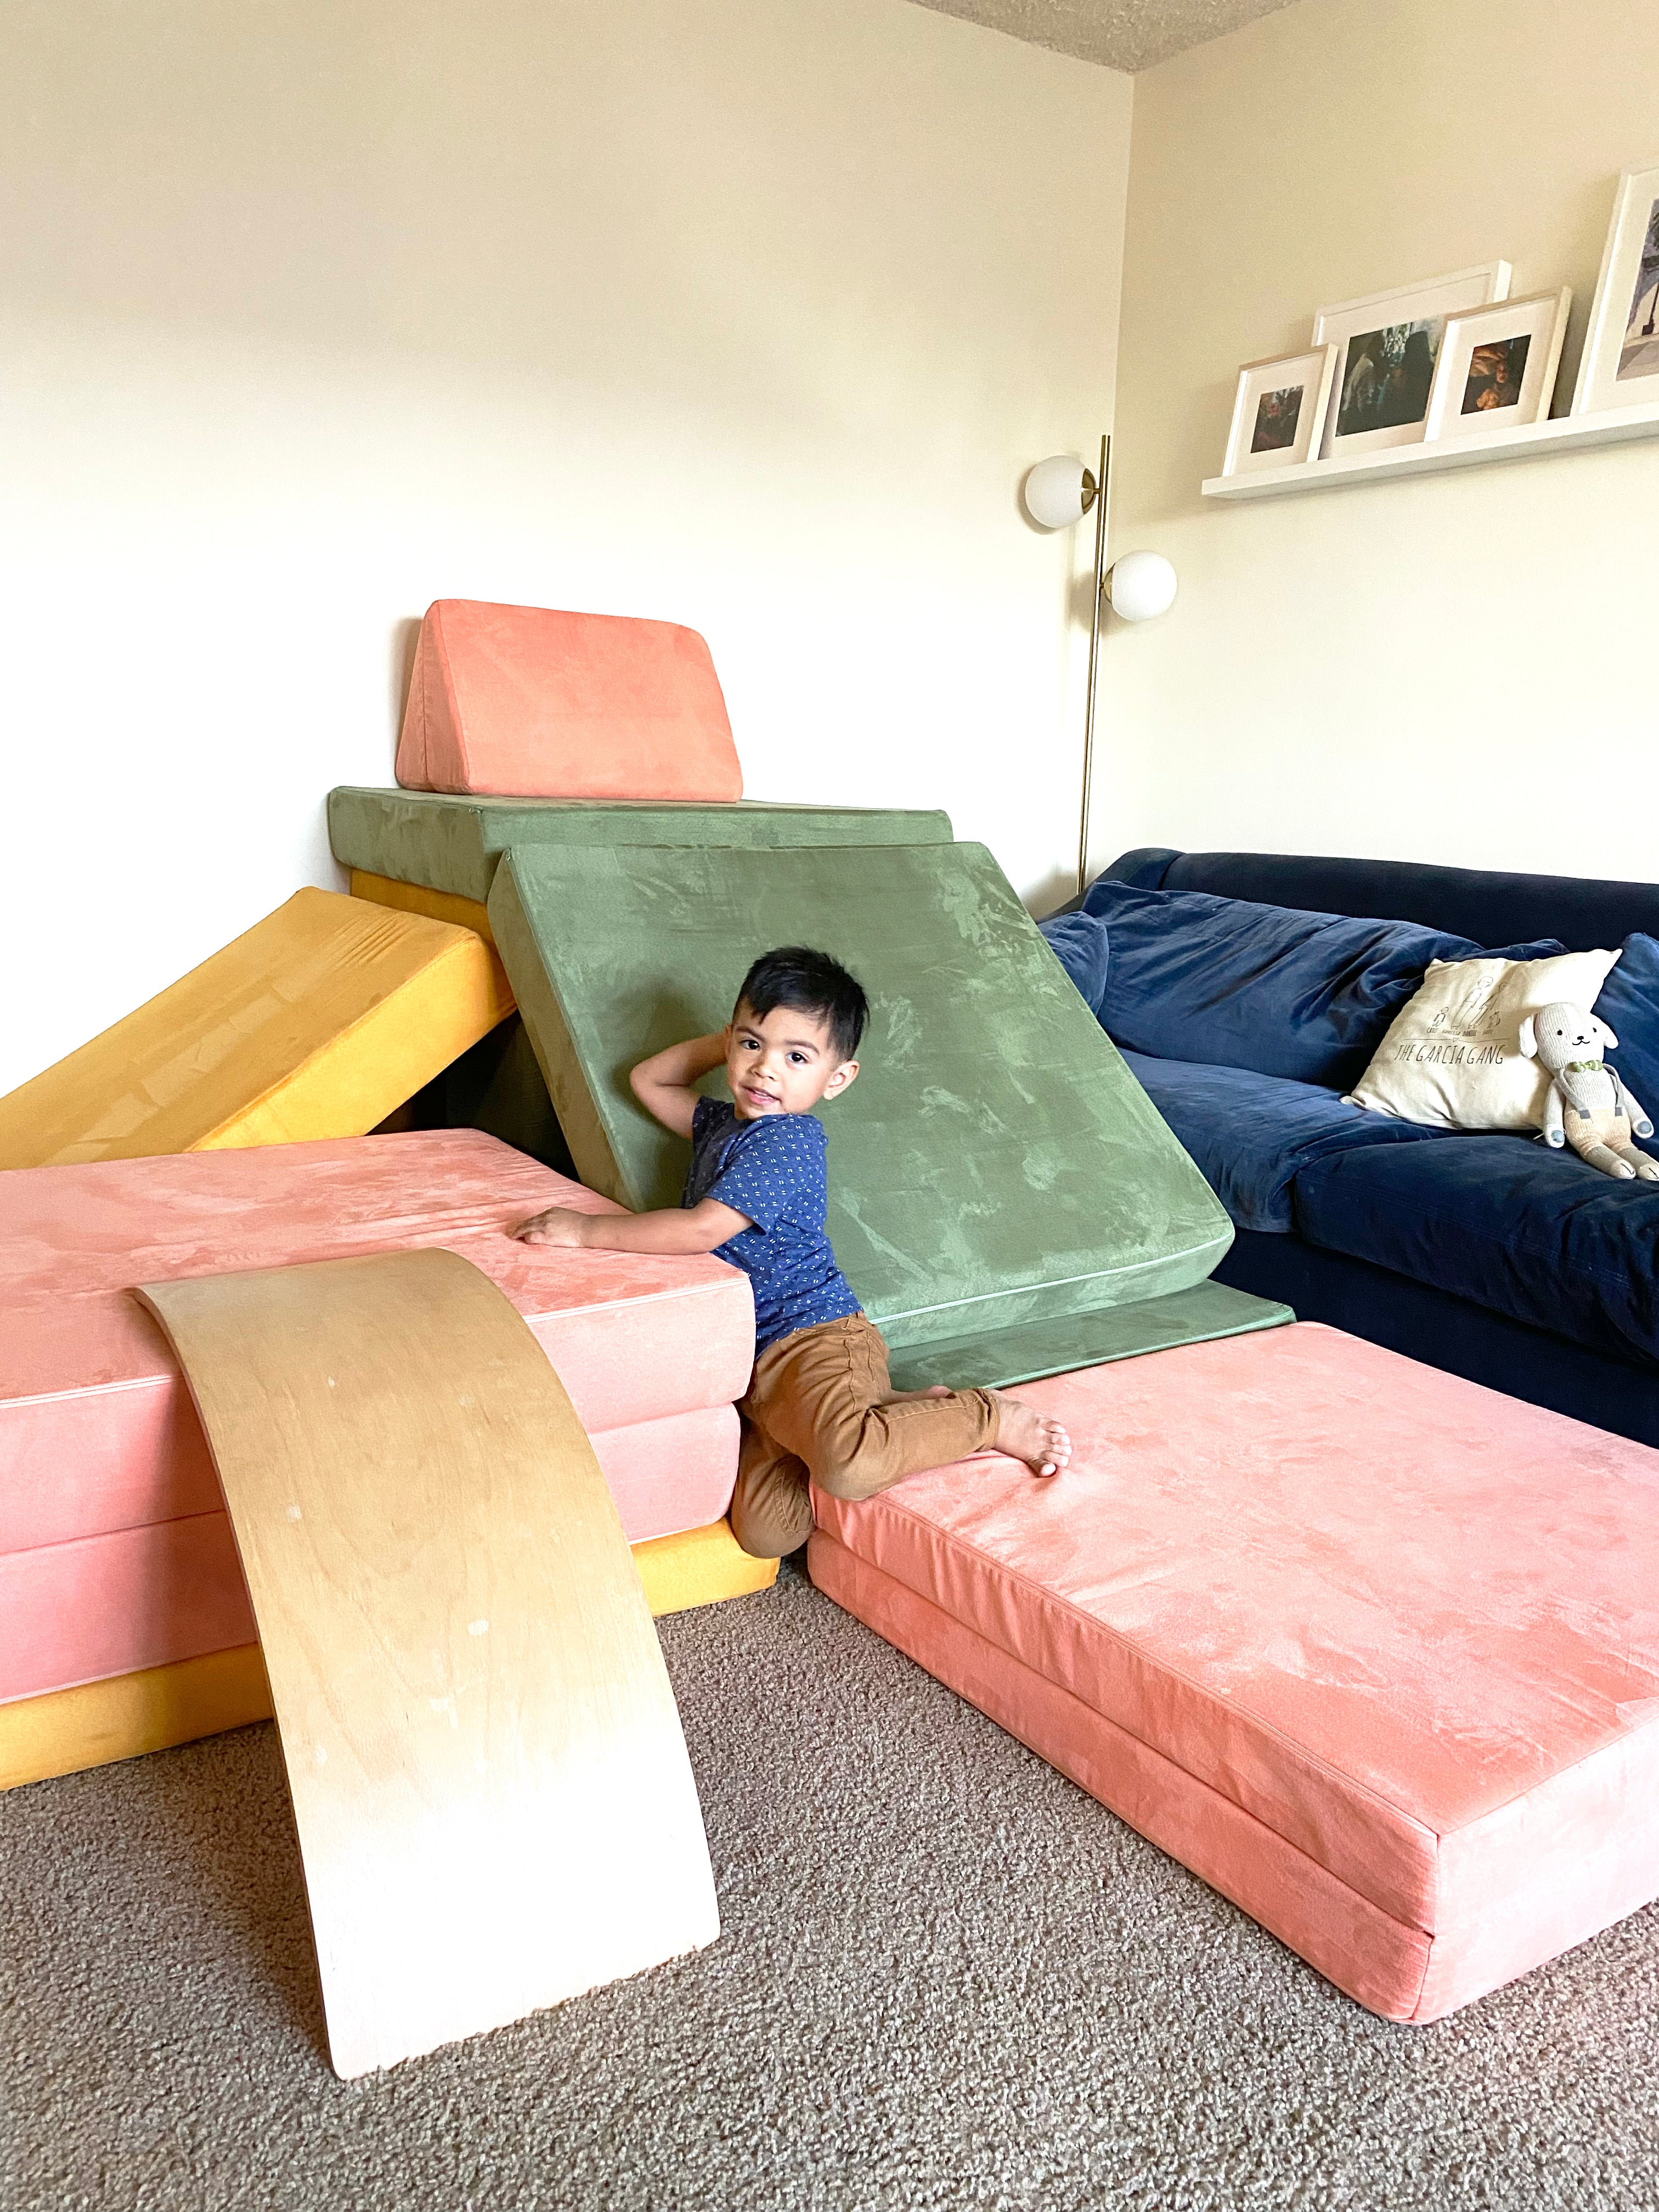 Child sitting on a three-Nugget build, with a slide, ramp to climb up, and lots of fun to be had